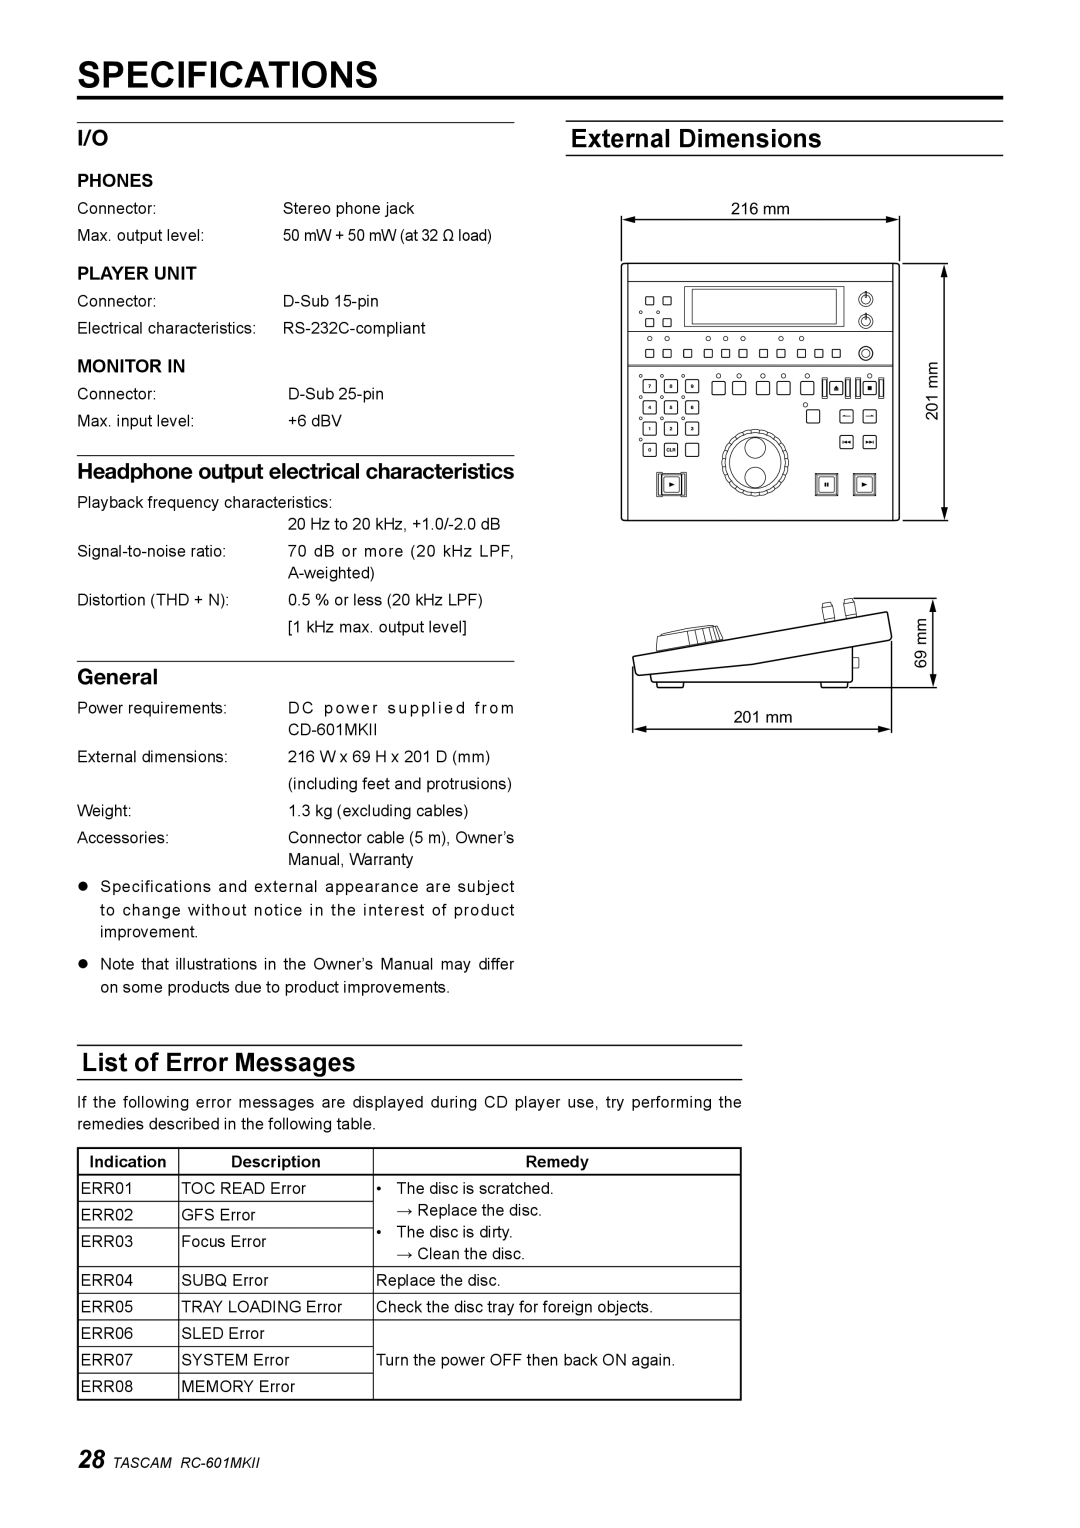 Tascam RC-601mkII Specifications, List of Error Messages, External Dimensions, Headphone output electrical characteristics 